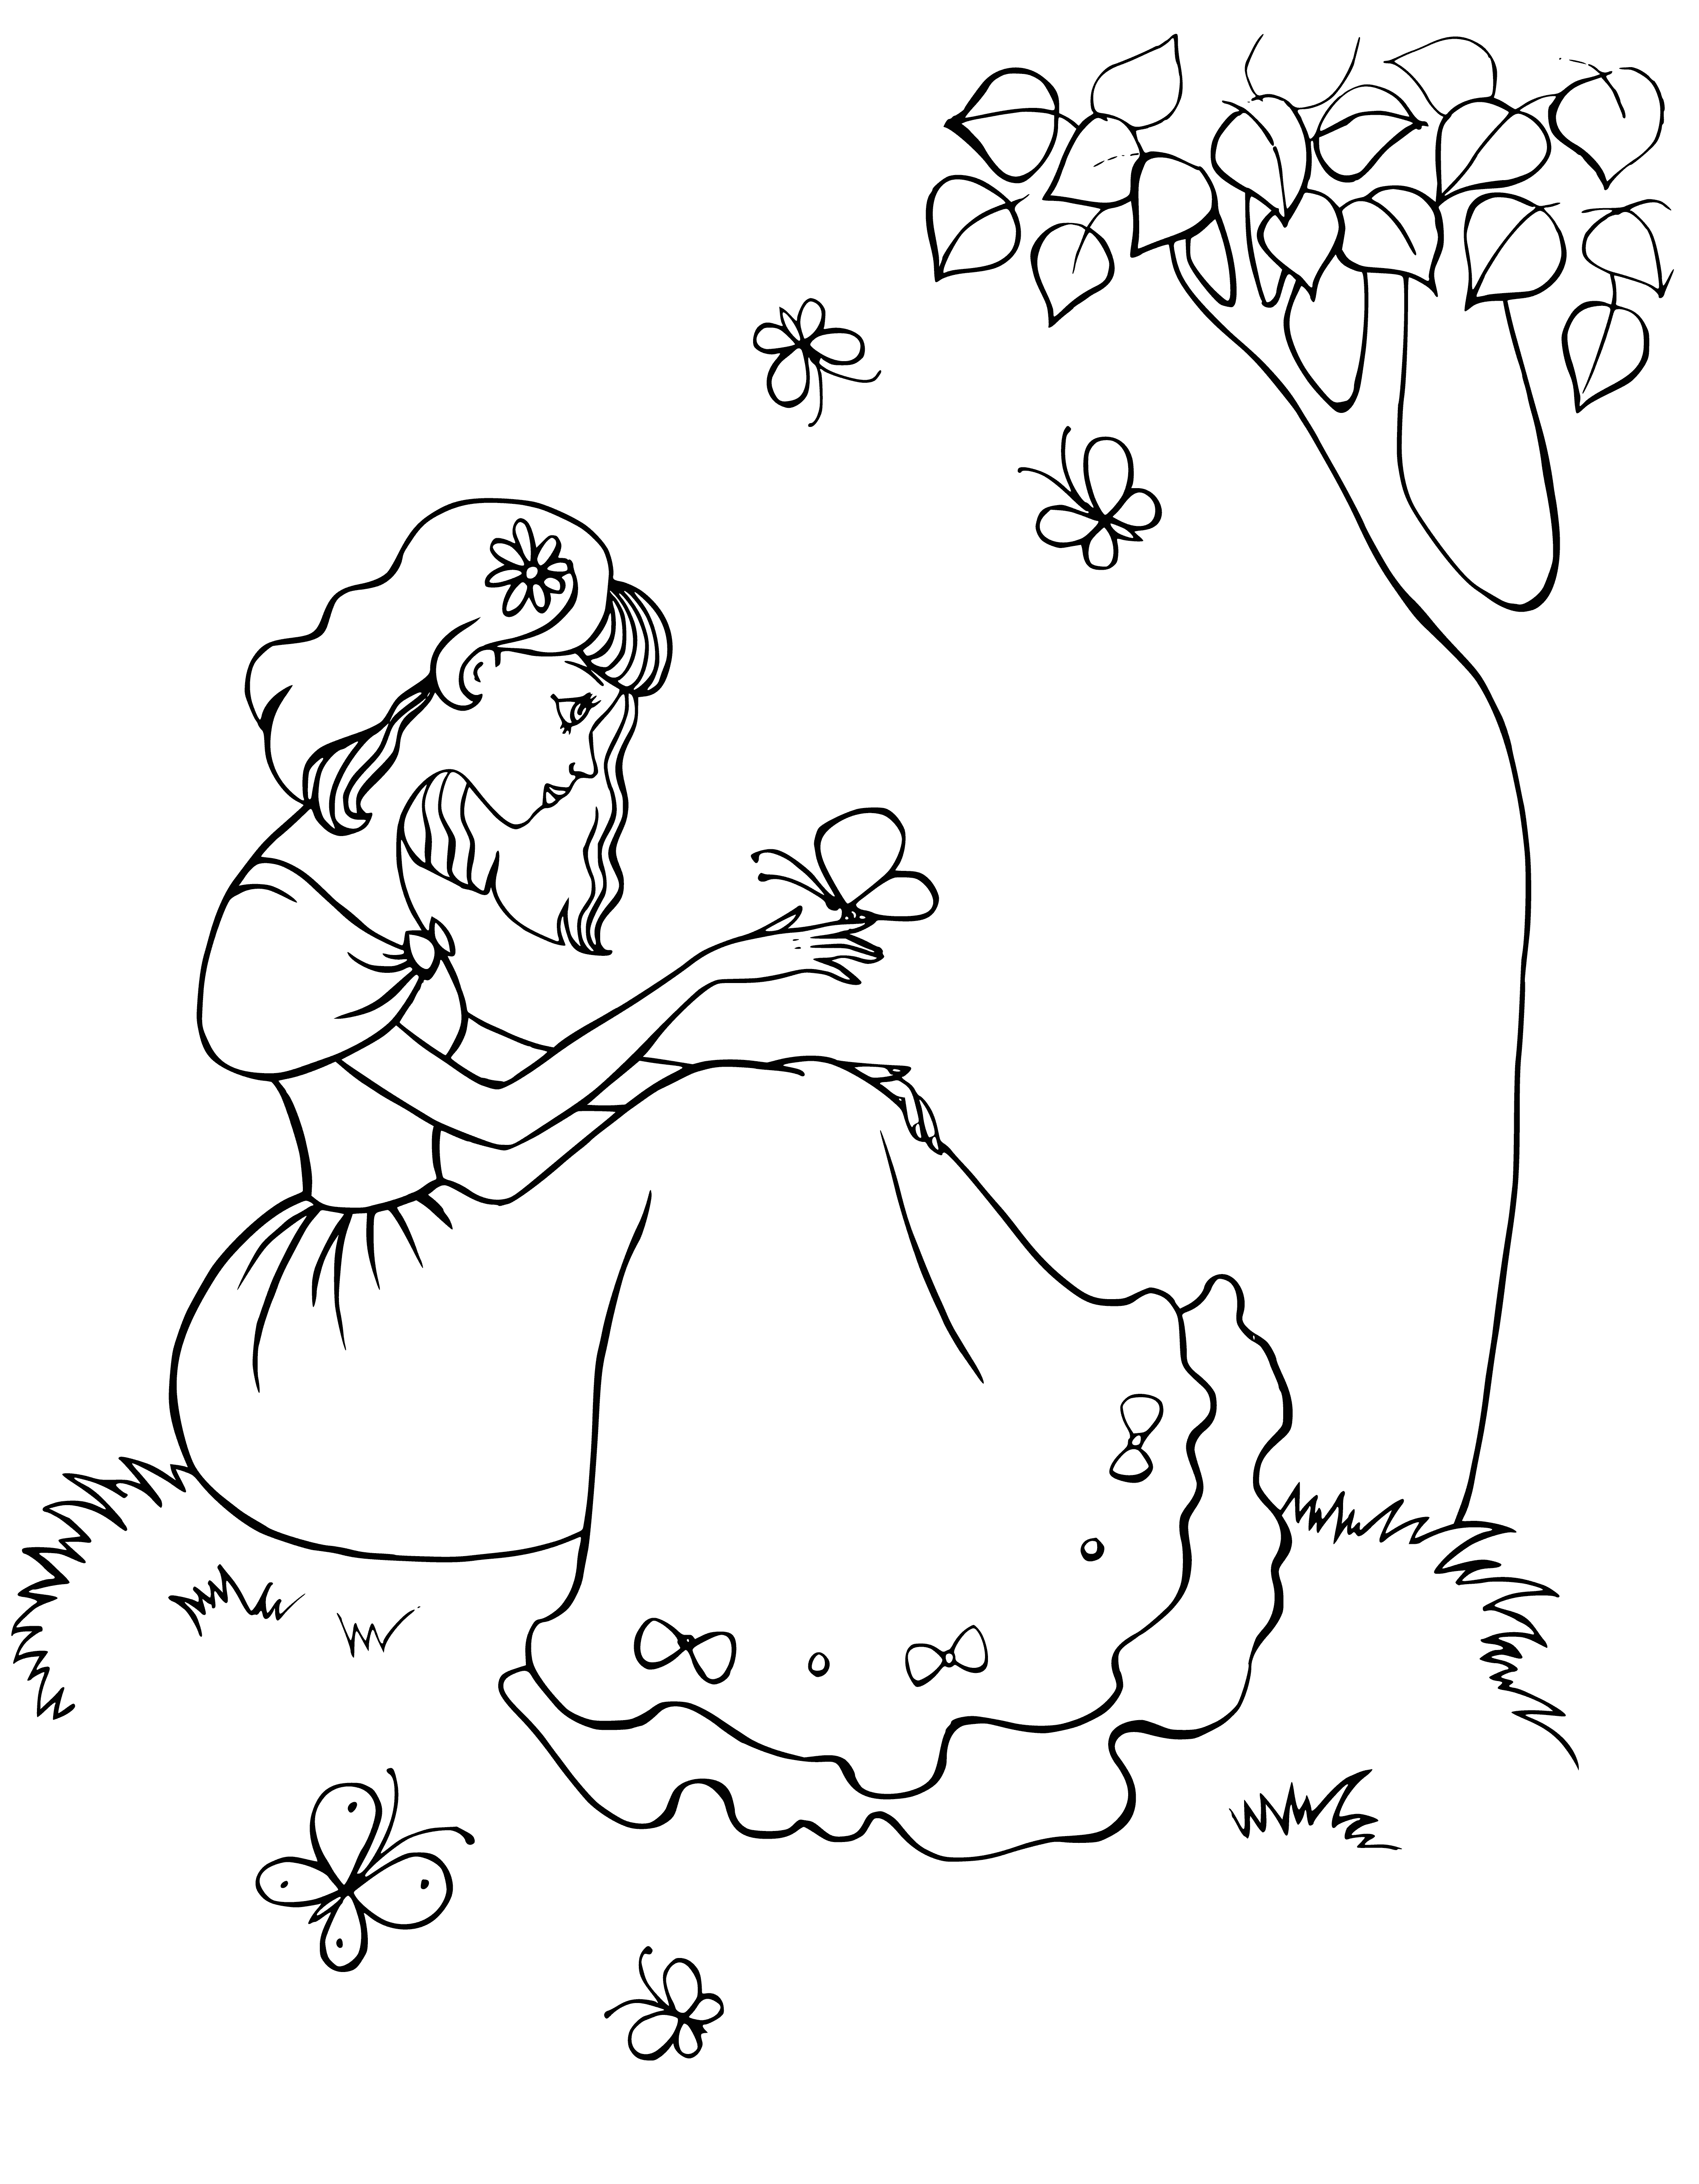 coloring page: Princess takes a peaceful stroll in her fairy kingdom enjoying the blooming flowers, surrounded by loyal subjects eager to please. #fairytale